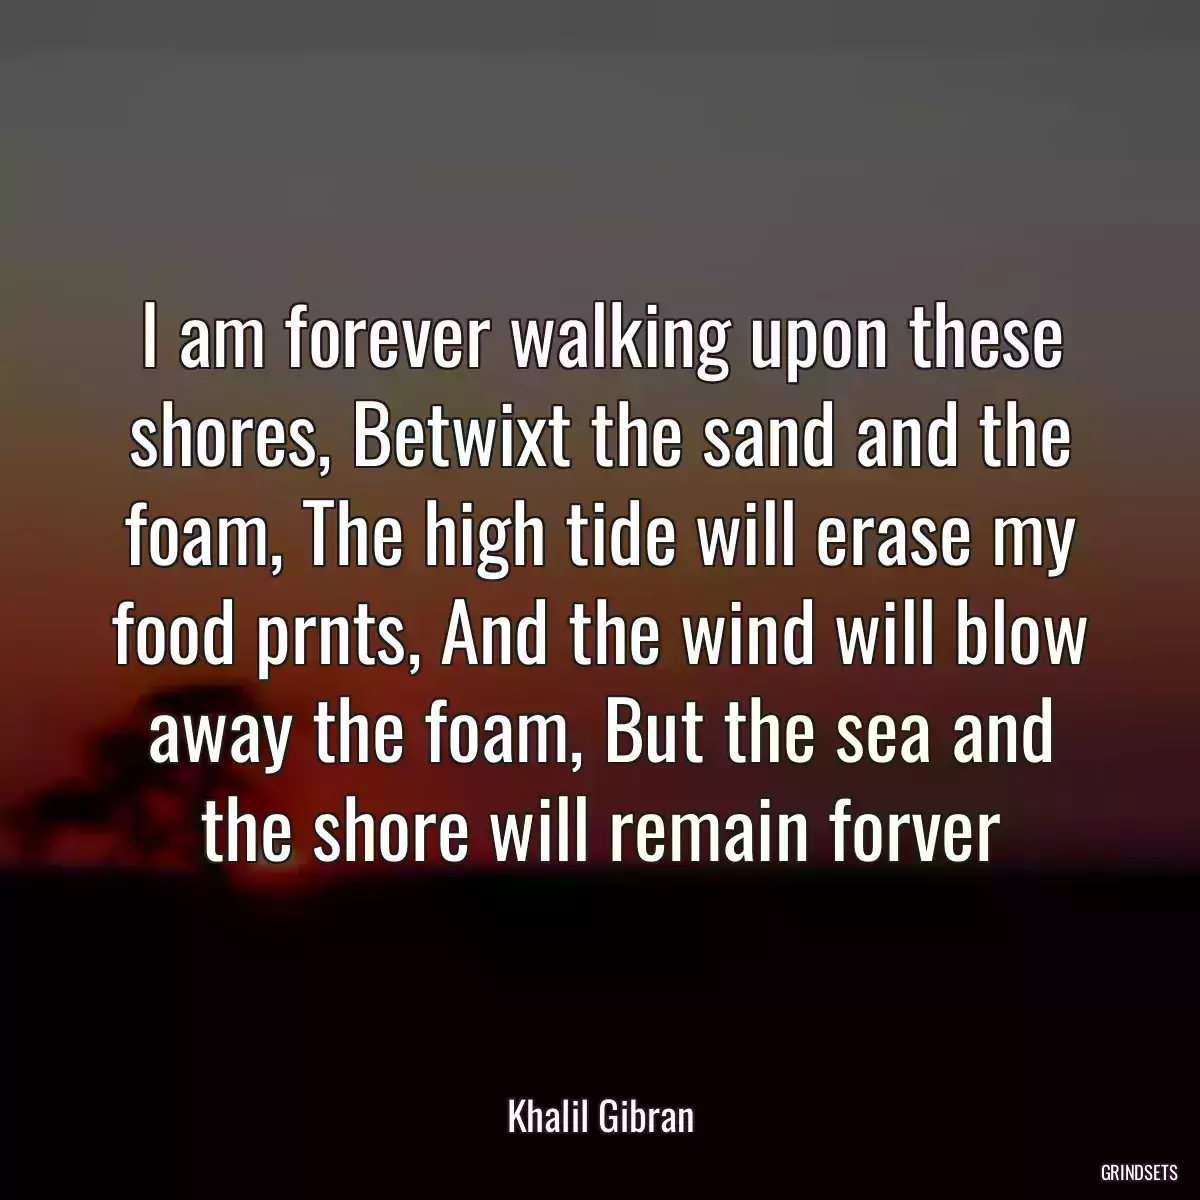 I am forever walking upon these shores, Betwixt the sand and the foam, The high tide will erase my food prnts, And the wind will blow away the foam, But the sea and the shore will remain forver